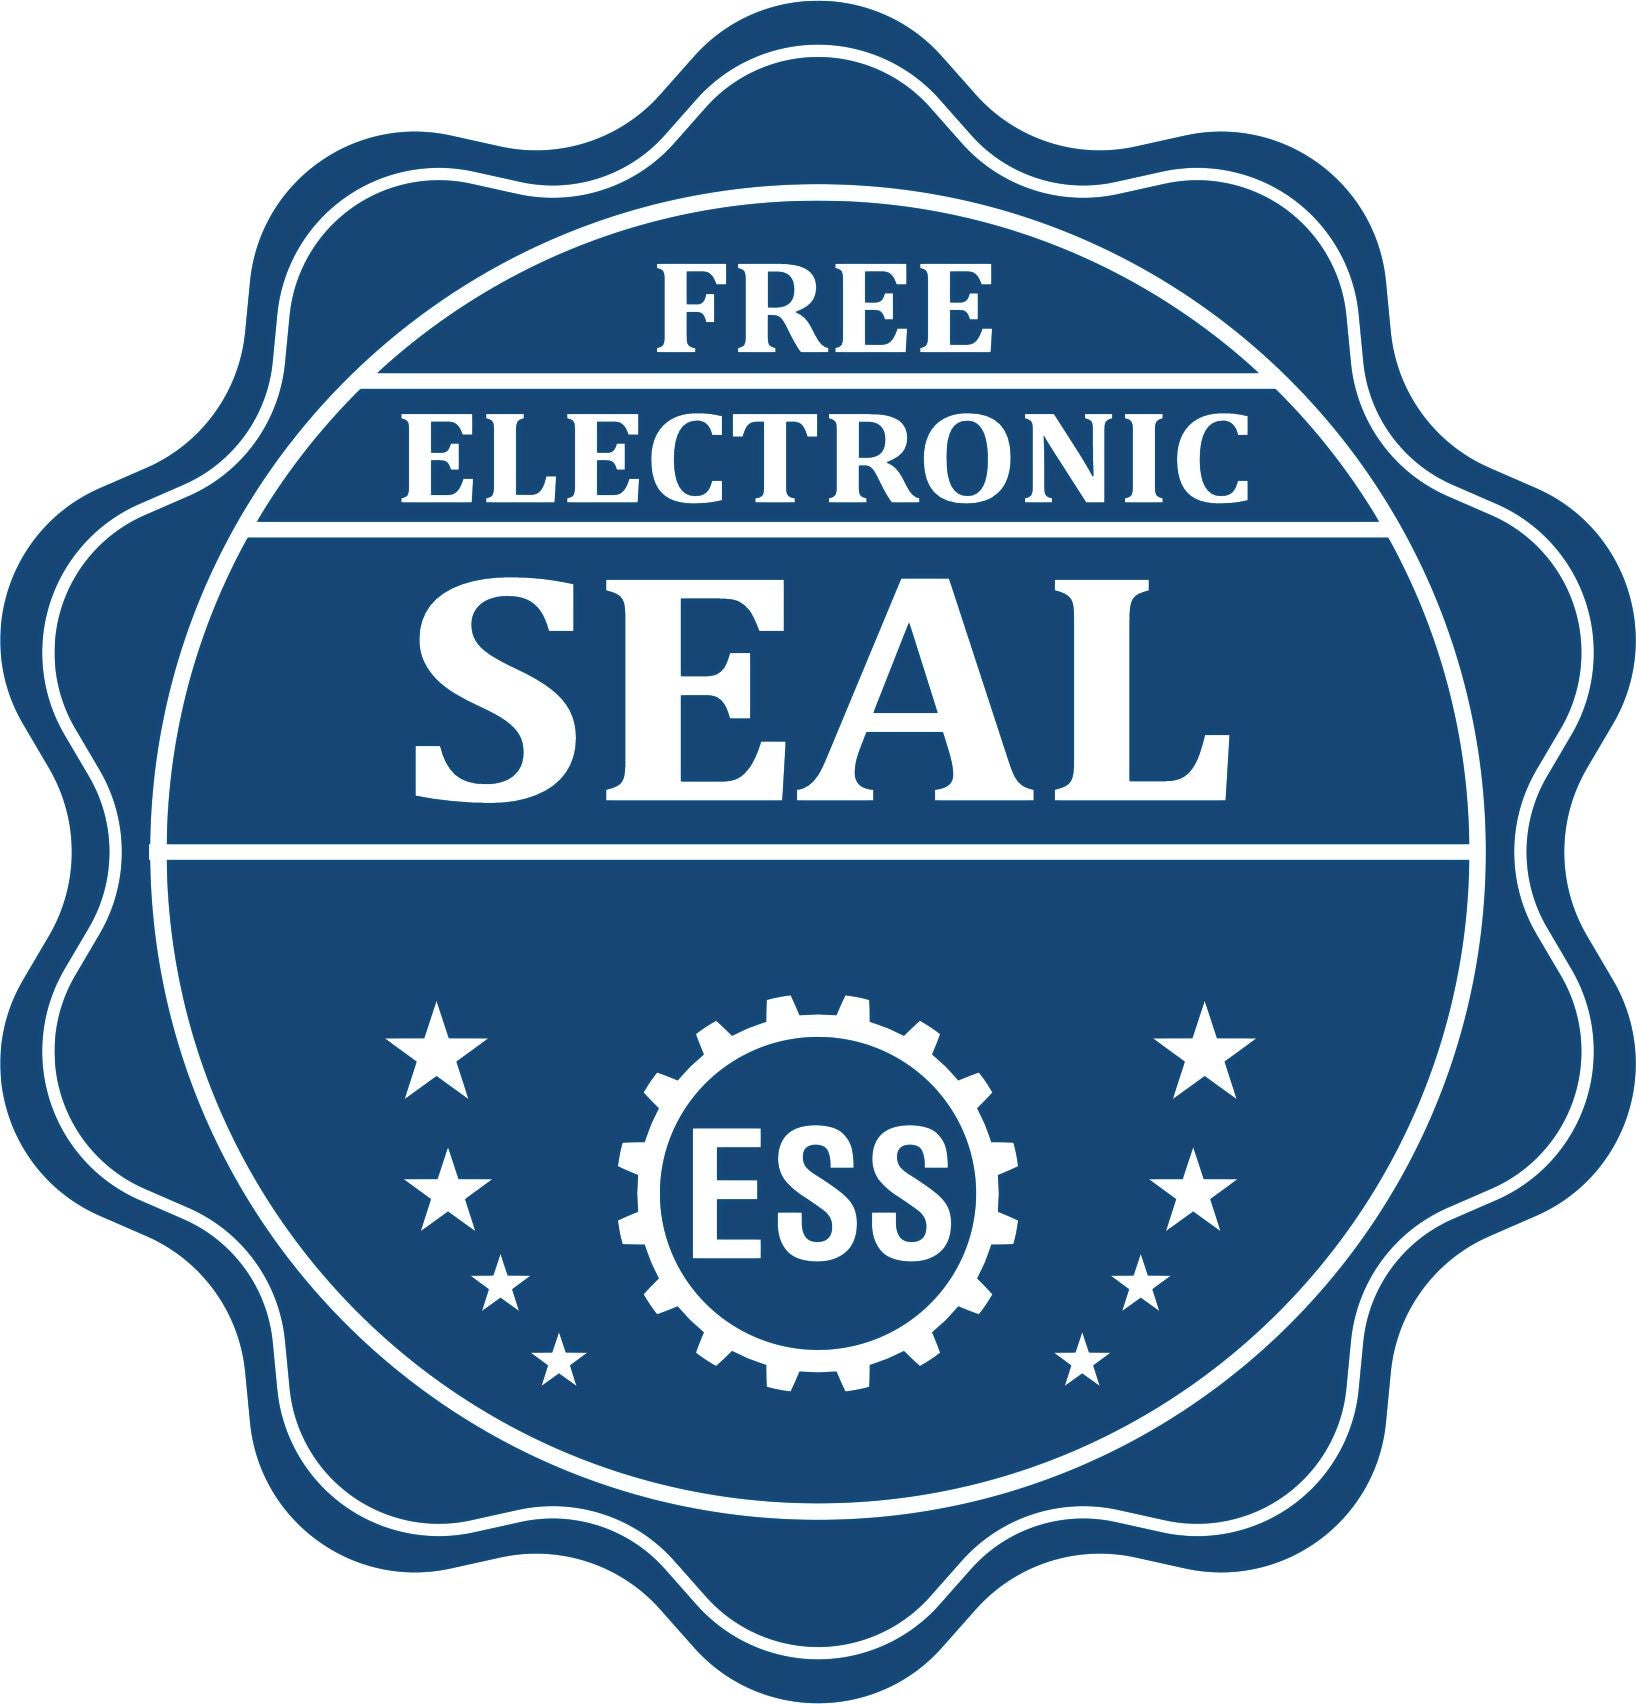 A badge showing a free electronic seal for the State of Oregon Extended Long Reach Geologist Seal with stars and the ESS gear on the emblem.